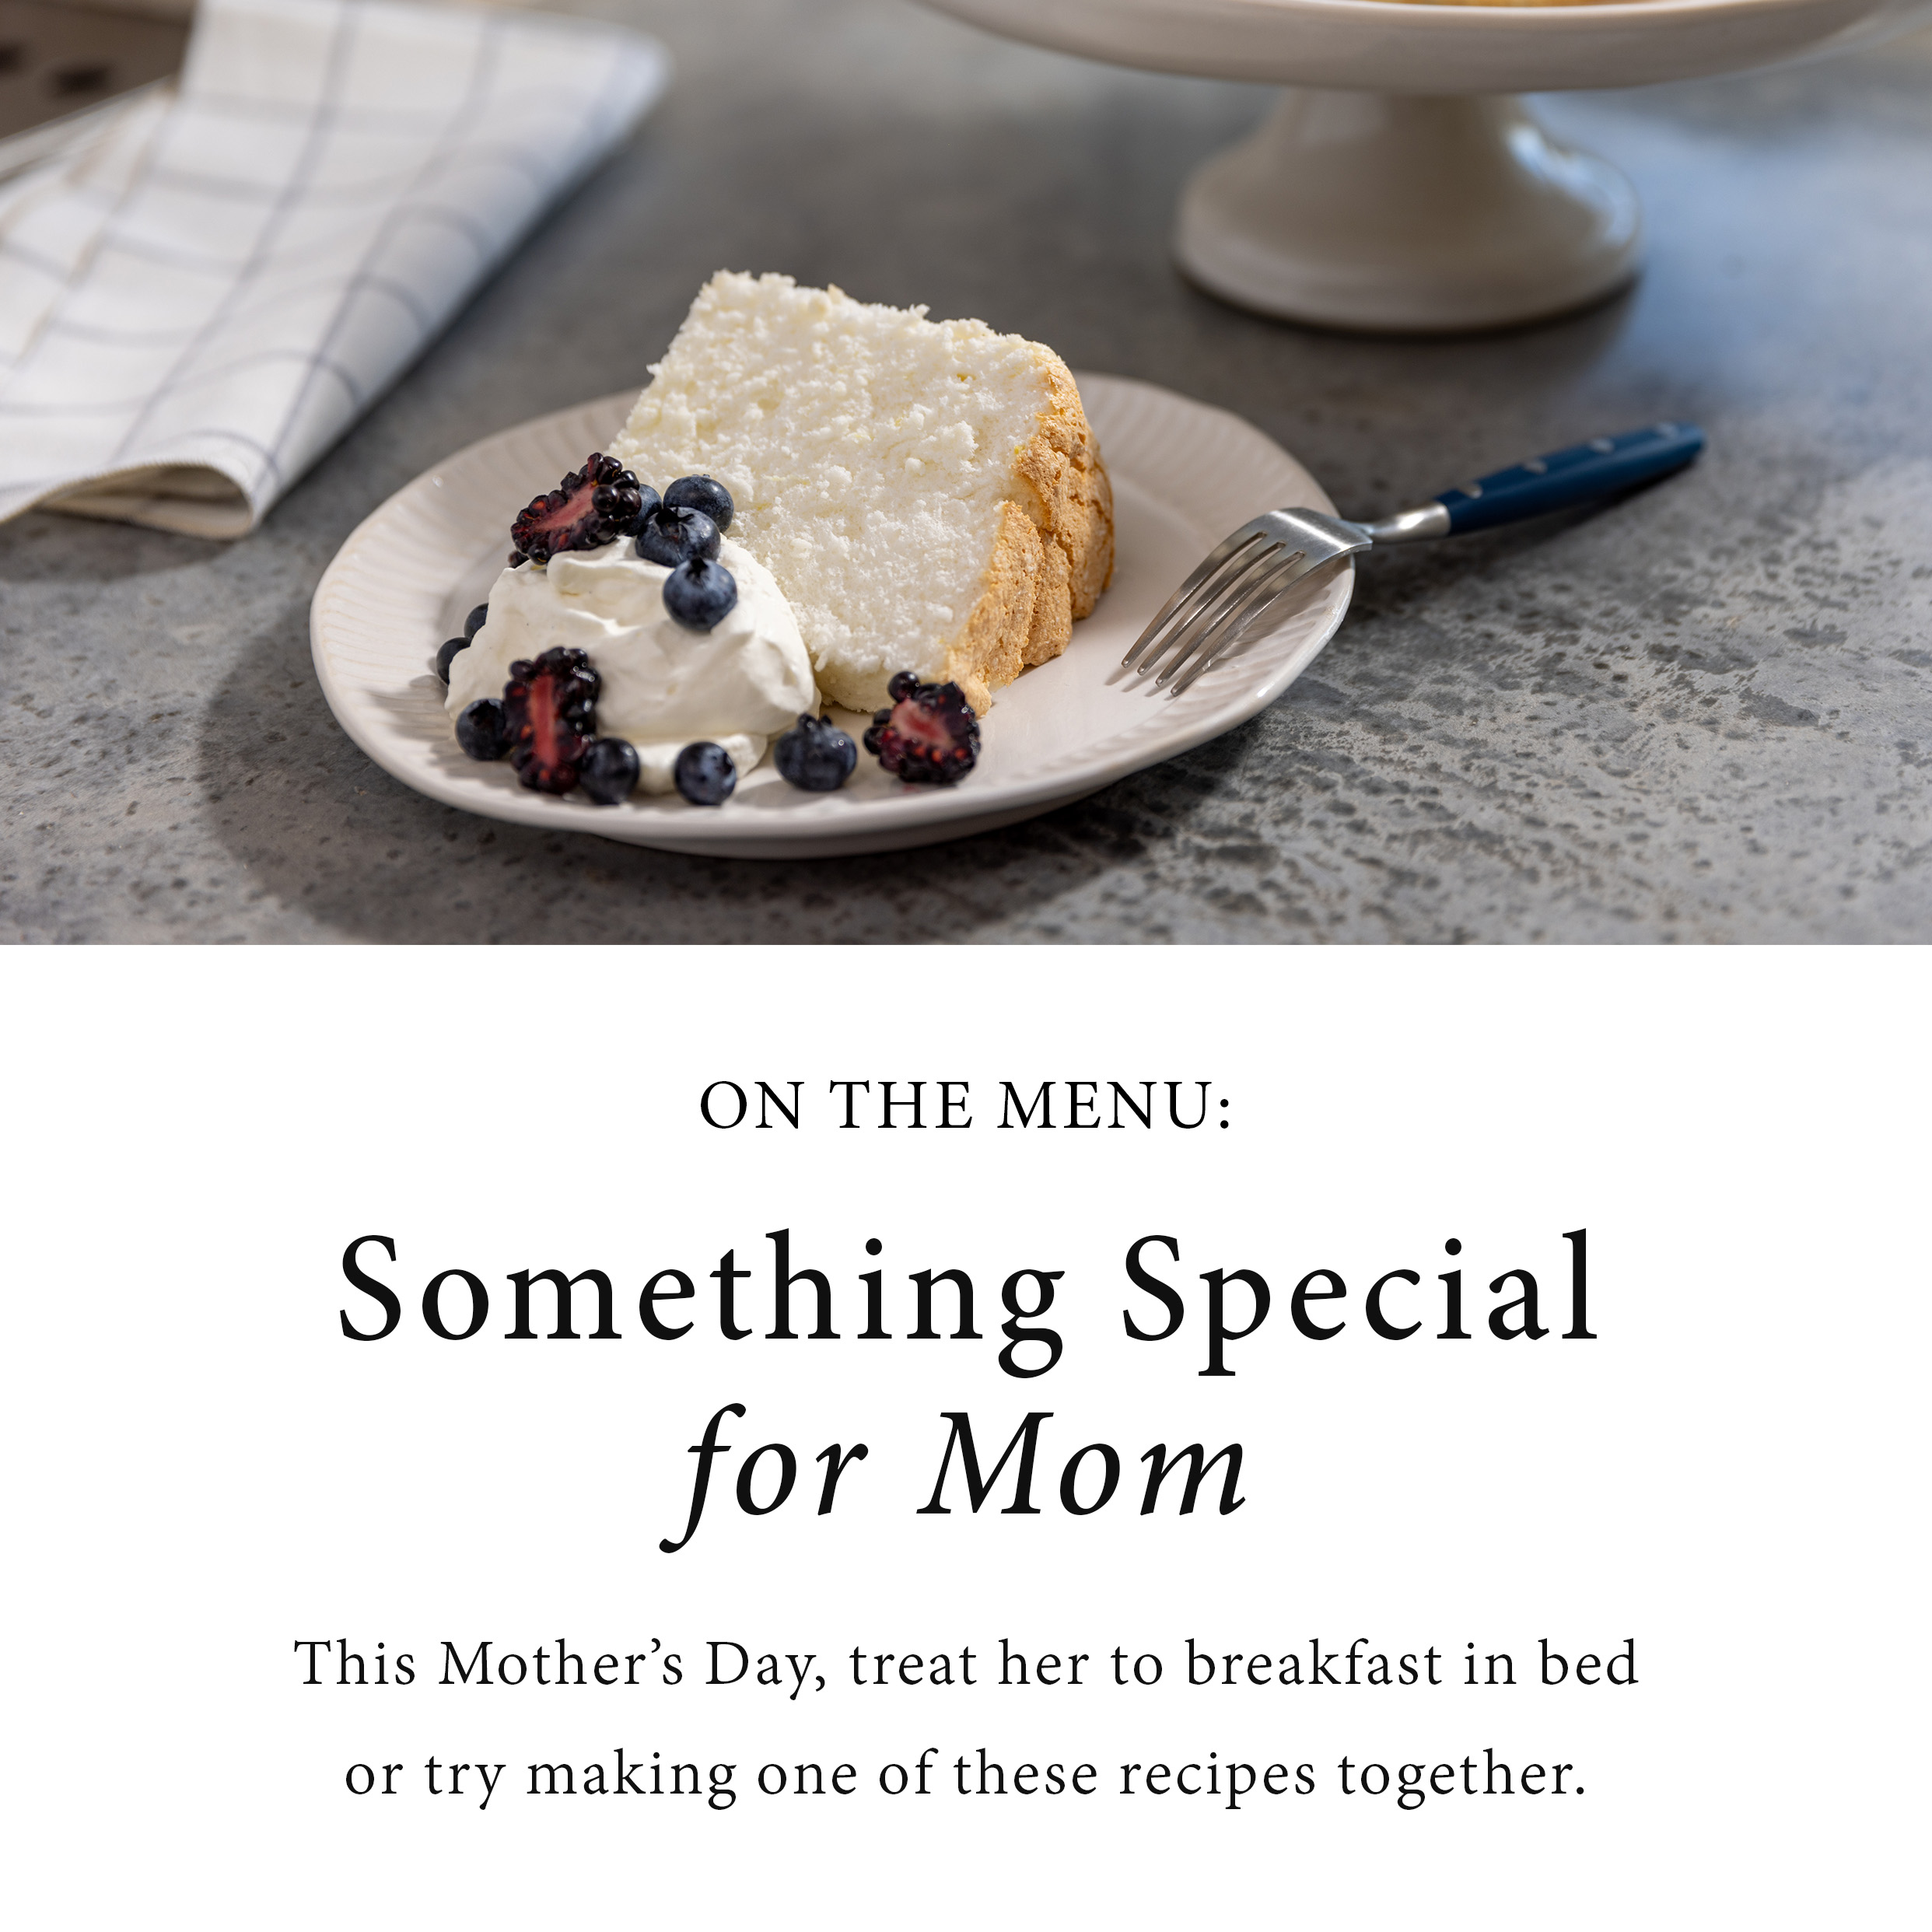 On the menu. Something special for mom. This mother's day, treat her to breakfast in bed or try making one of these recipes together